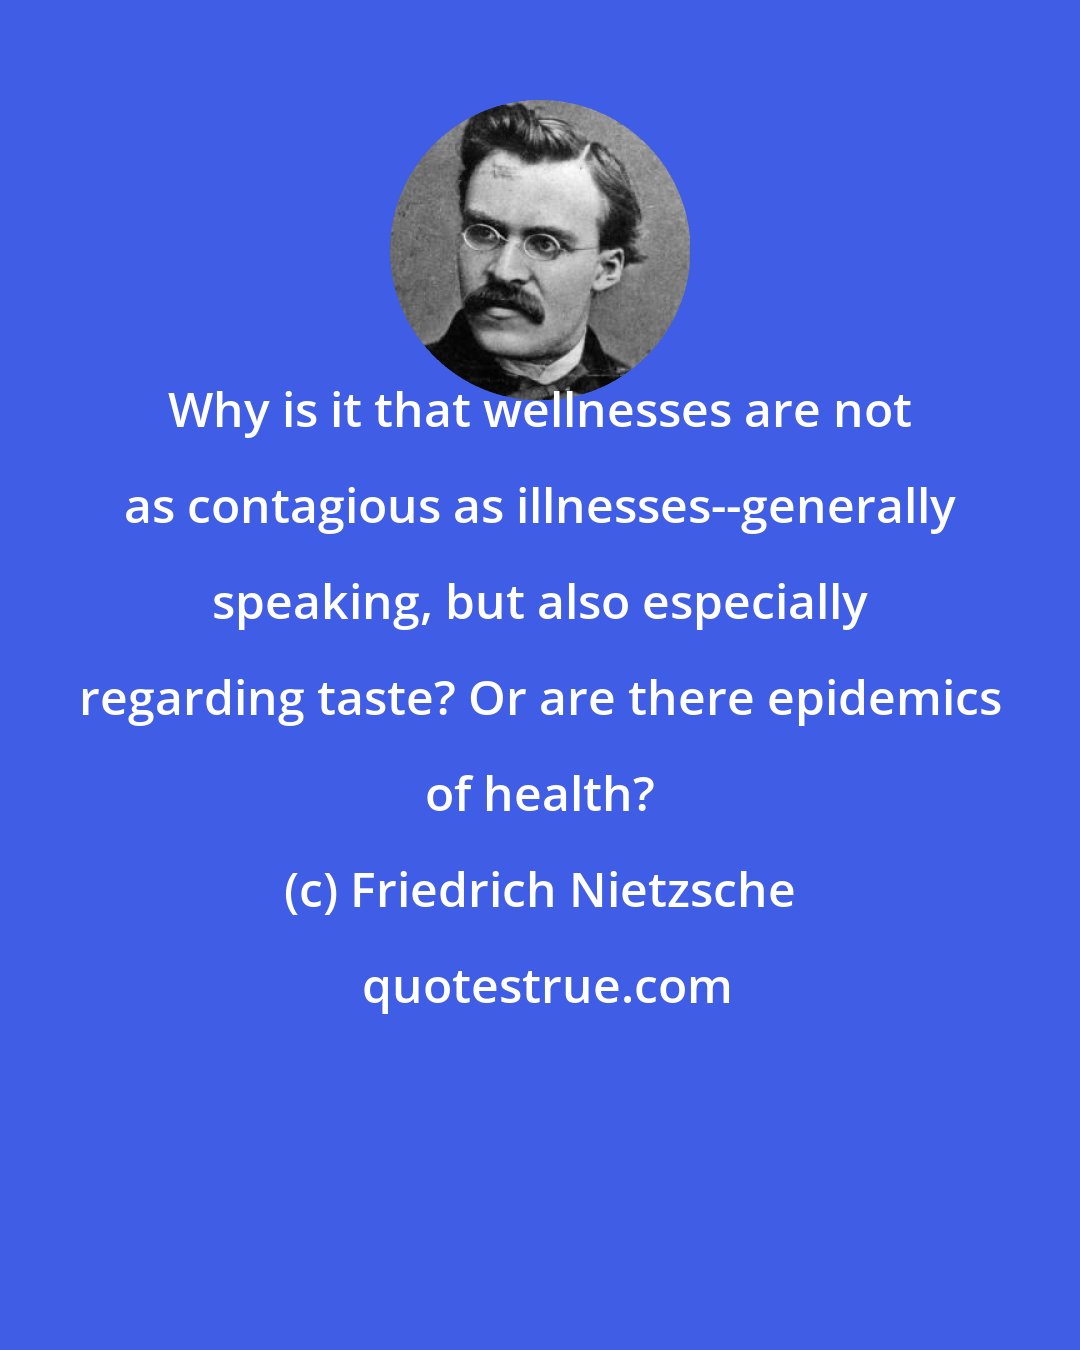 Friedrich Nietzsche: Why is it that wellnesses are not as contagious as illnesses--generally speaking, but also especially regarding taste? Or are there epidemics of health?